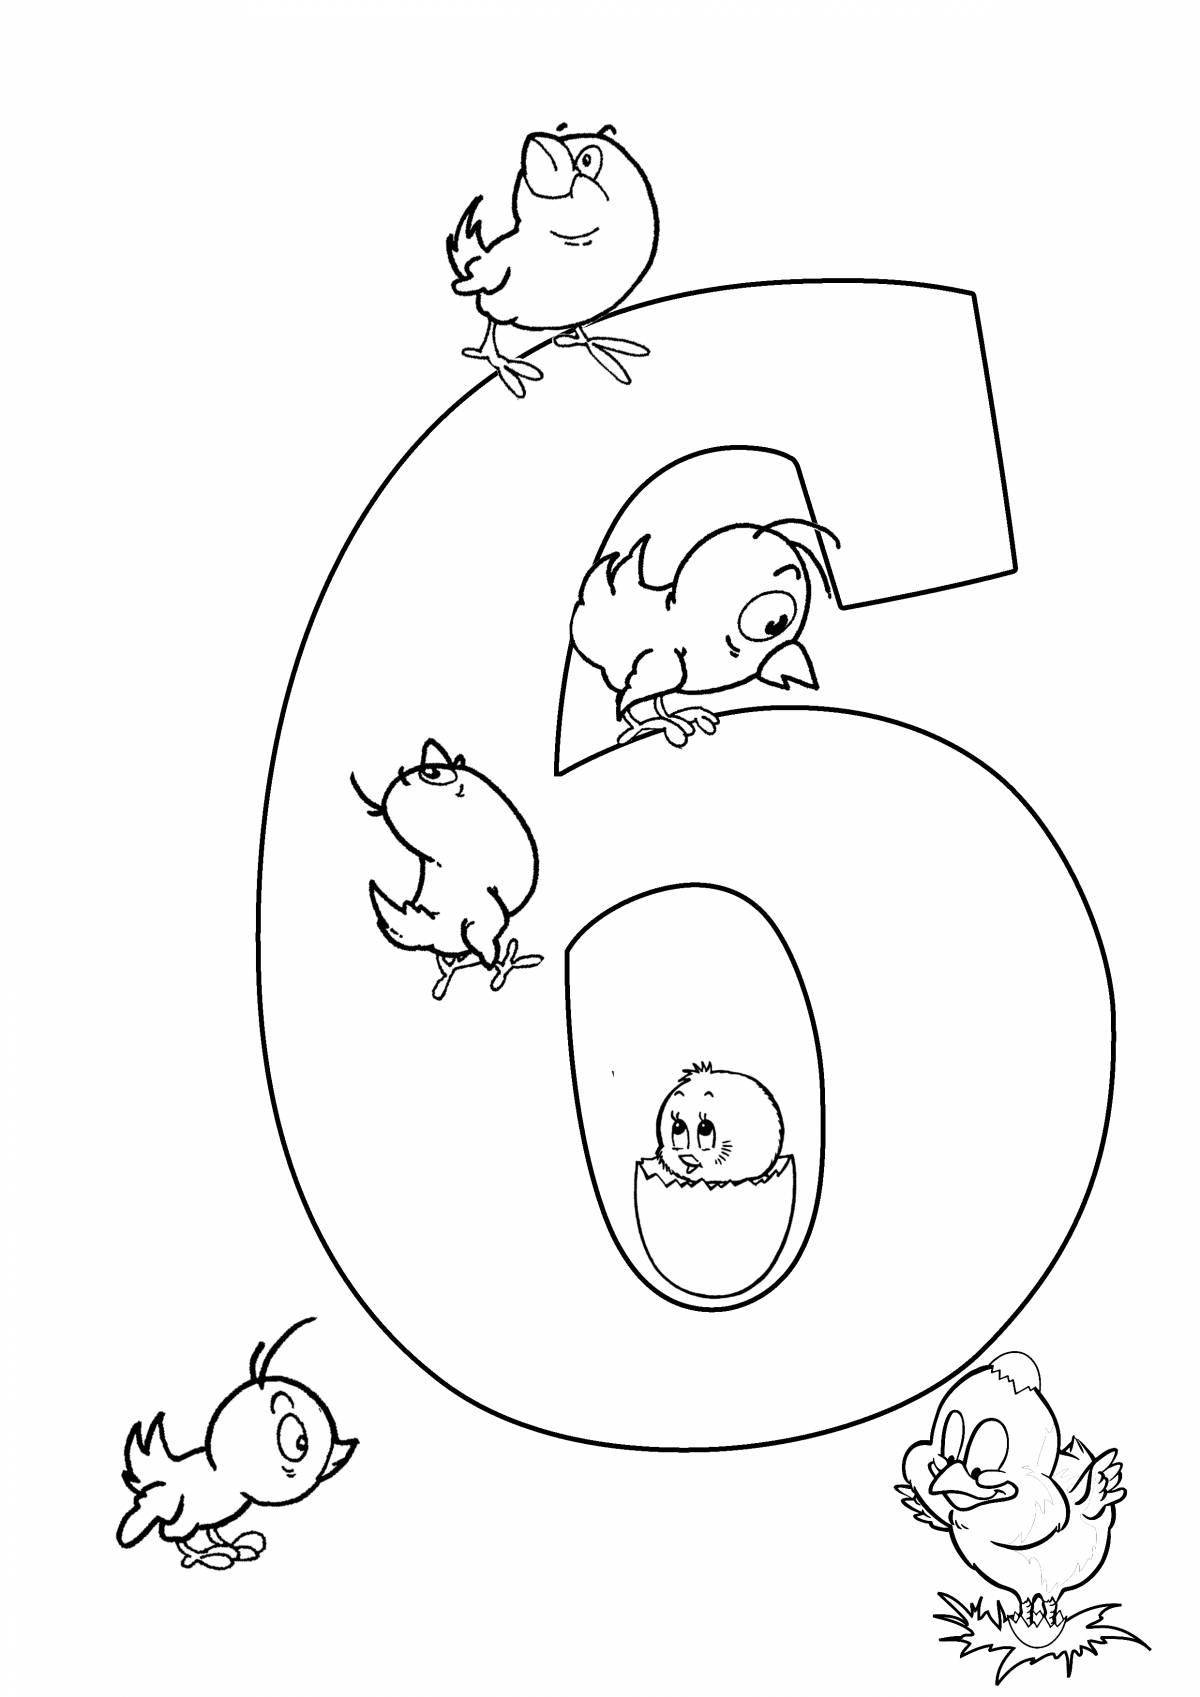 Colorful explosive funny number coloring page